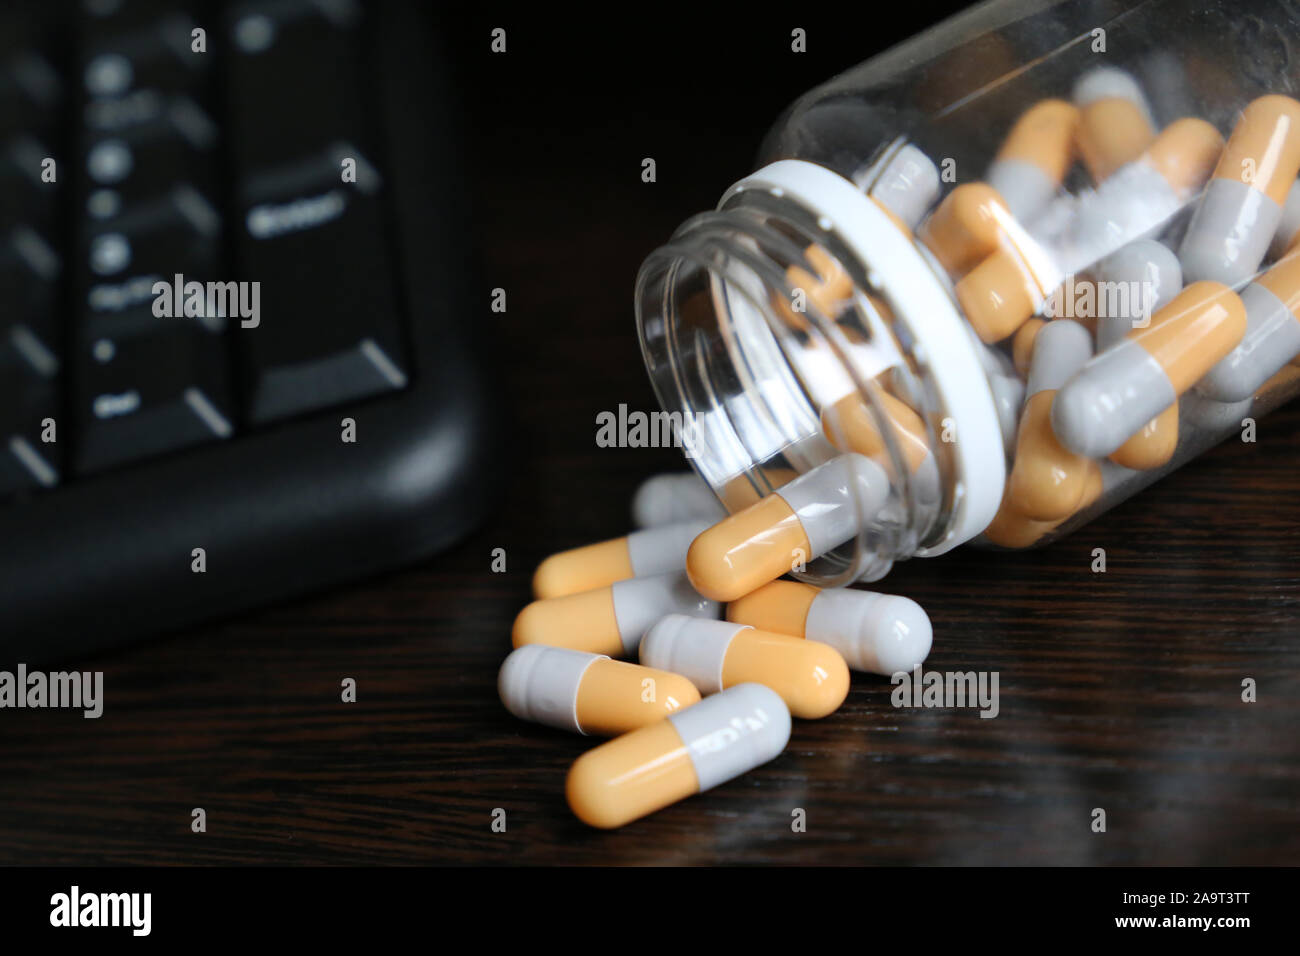 Pills near PC keyboard on a dark wooden table, capsules scattered from a bottle. Concept of taking medication in office, vitamins for energy and work Stock Photo